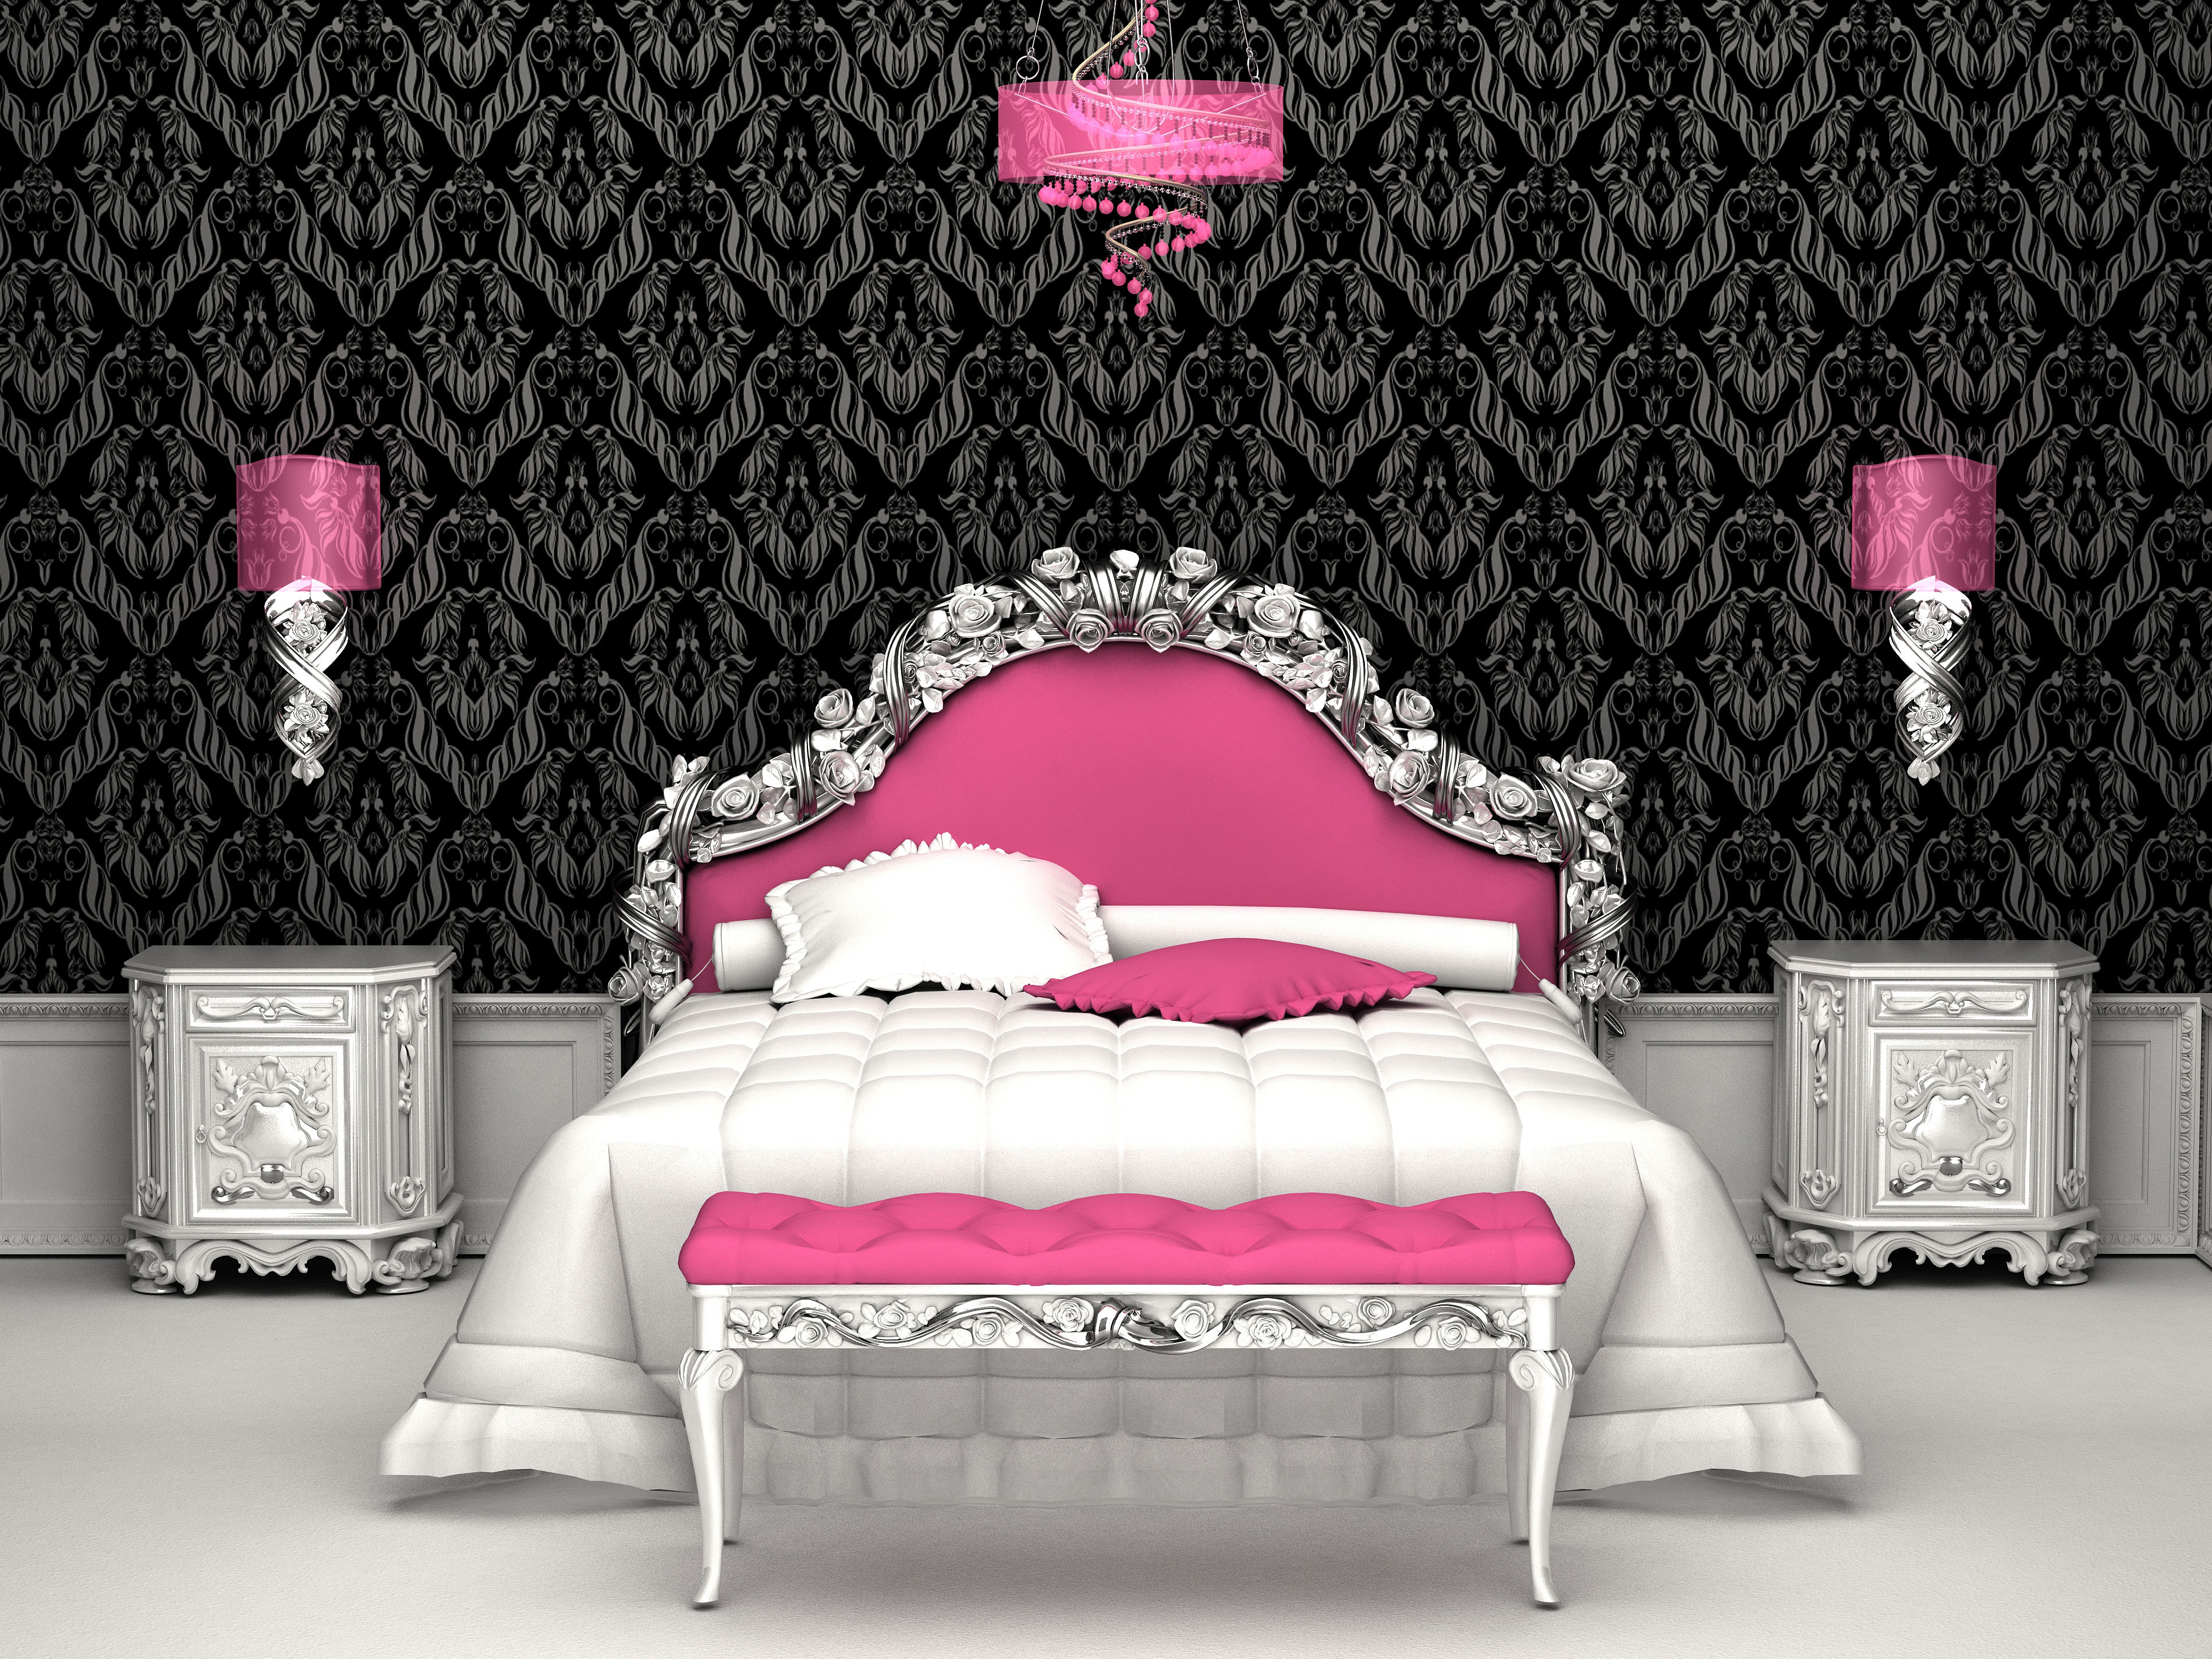 Bedroom Full HD Wallpaper And Background 3800x2850 ID323248